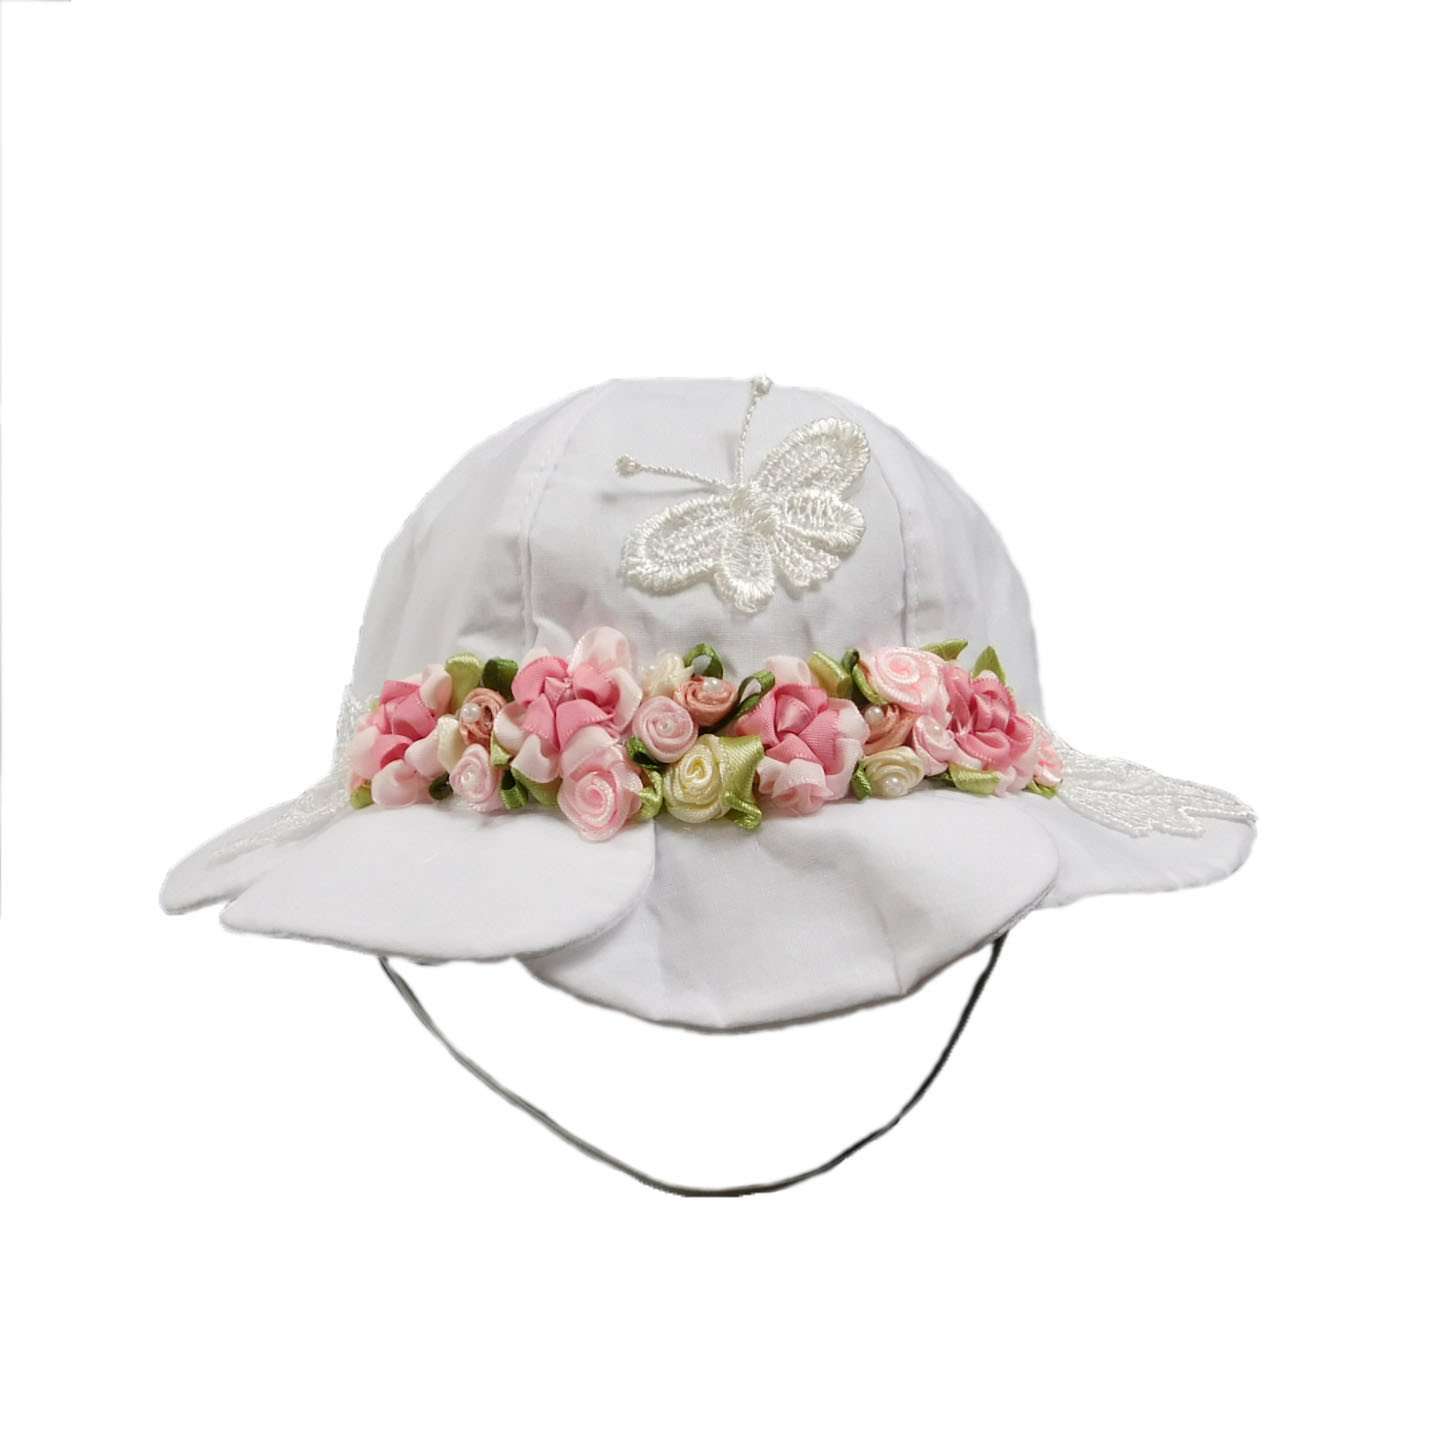 Baby Girl Sun Hat Embellished with Silk Roses Facesaver Hat HHkids SK051WH6 6-12mos  